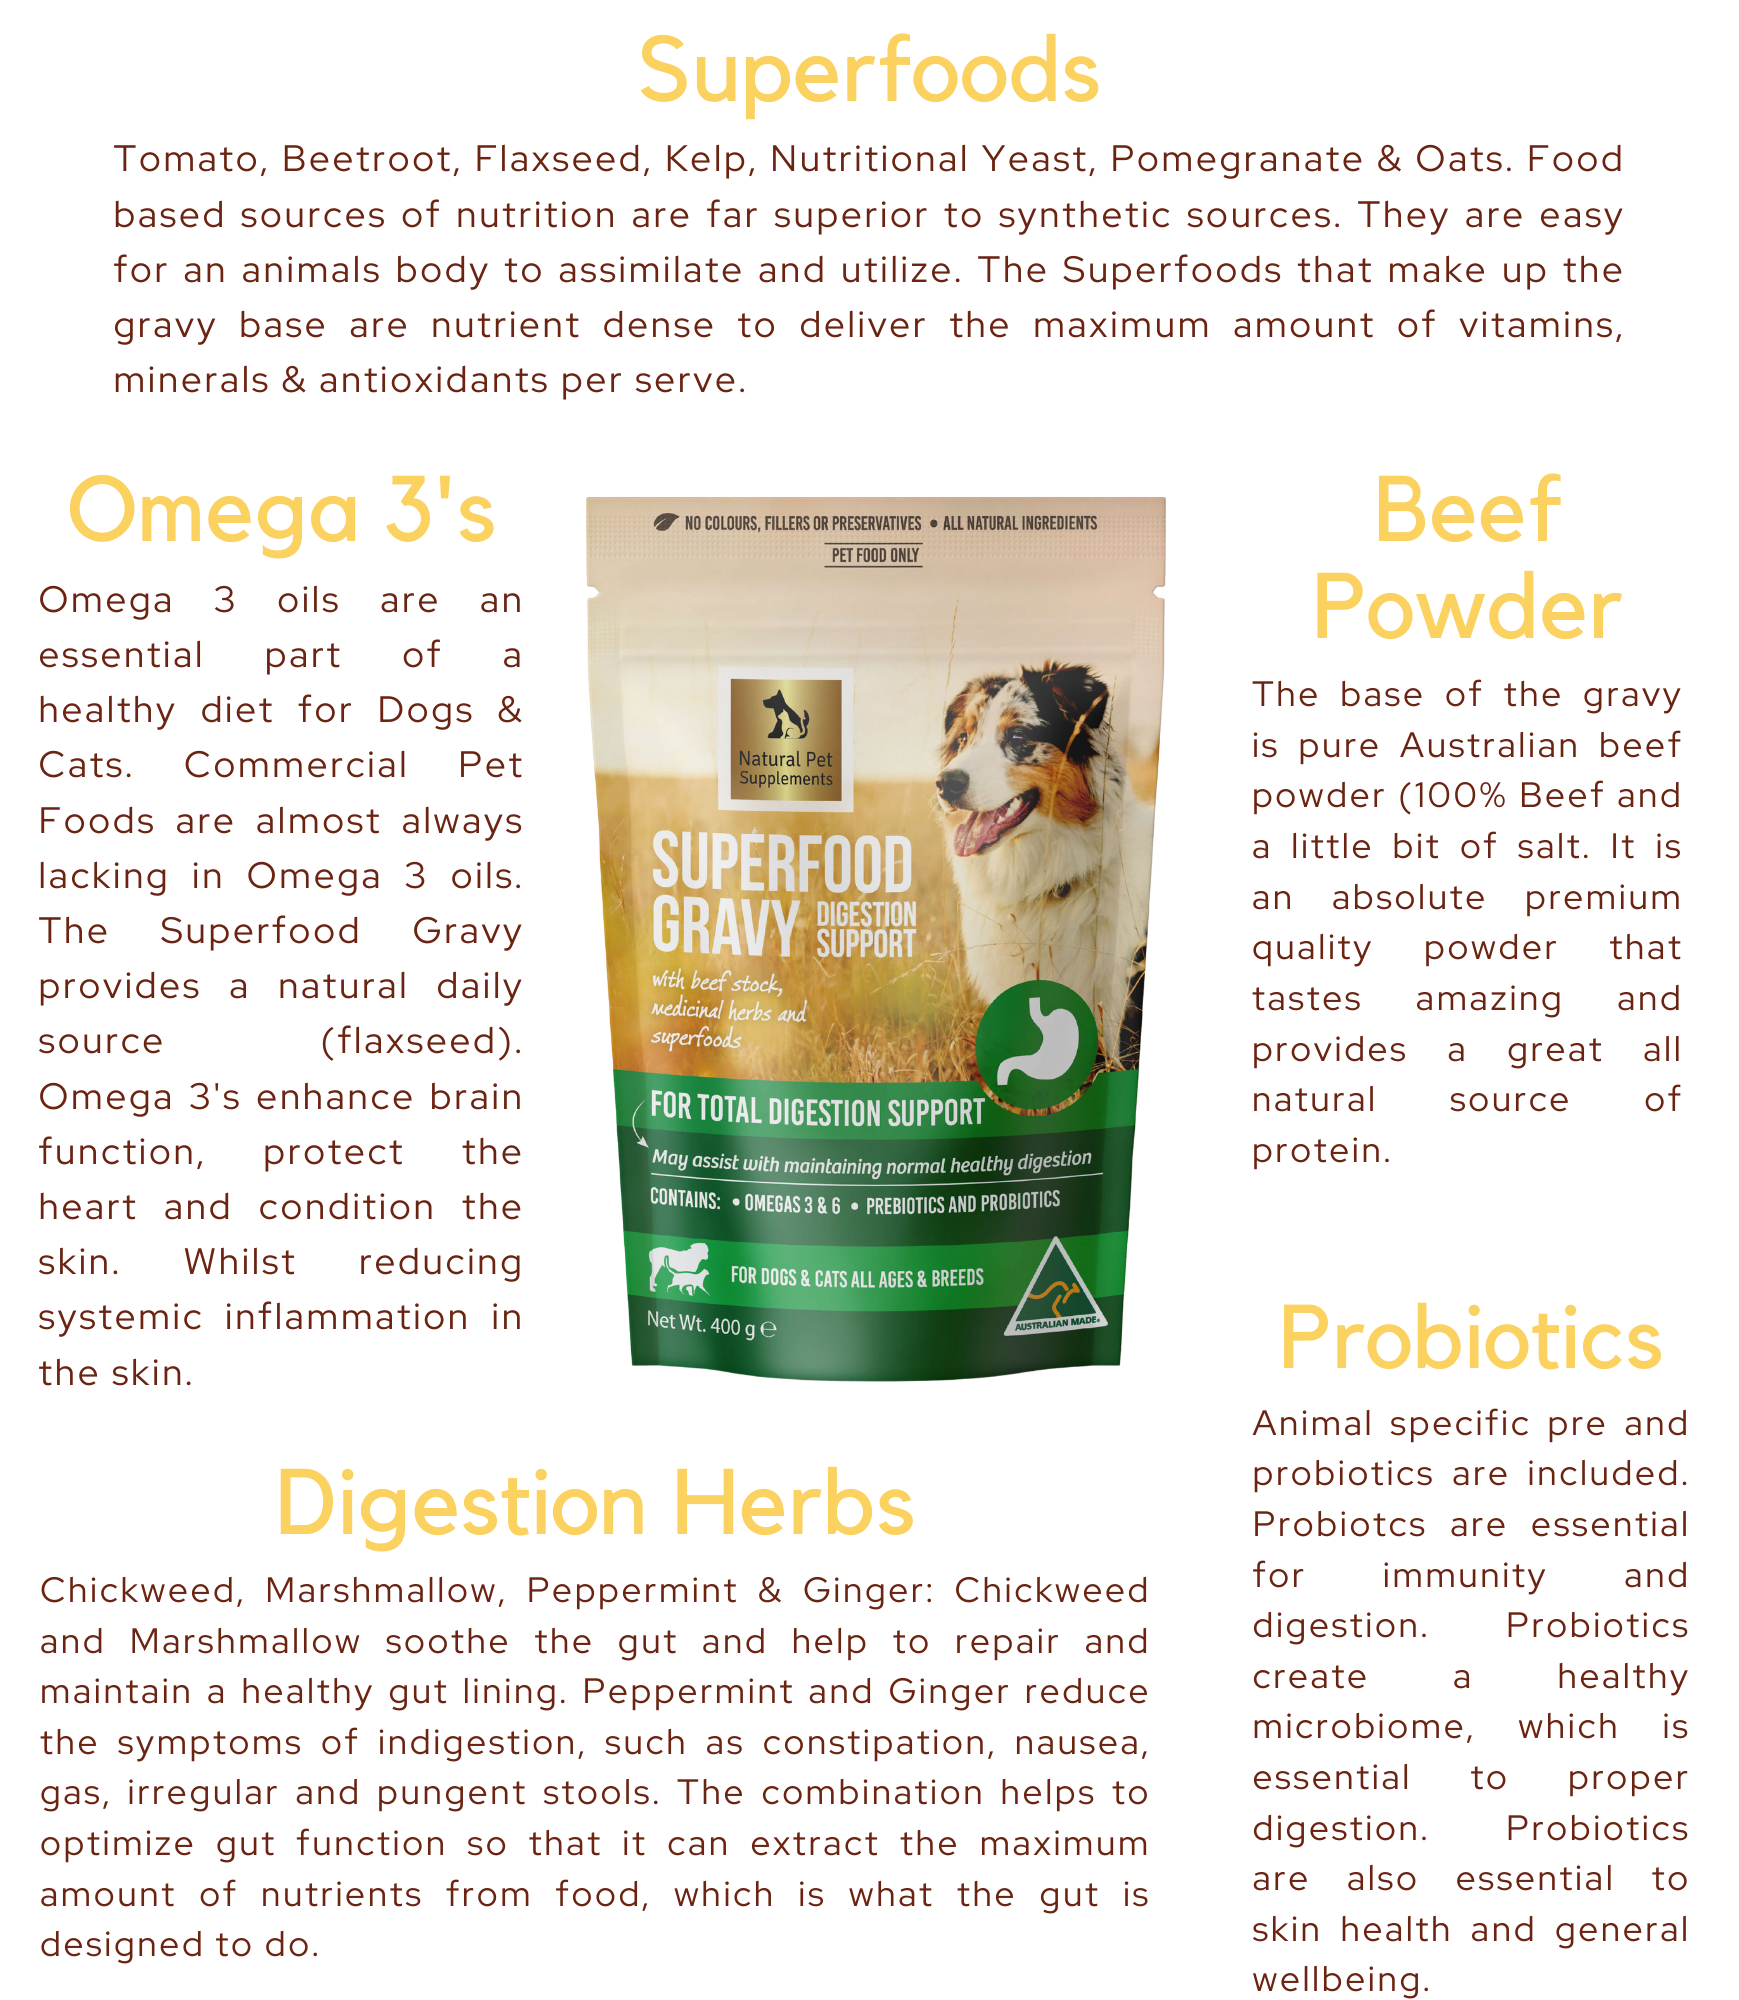 Digestion Support Superfood Gravy for Dogs and Cats 400g